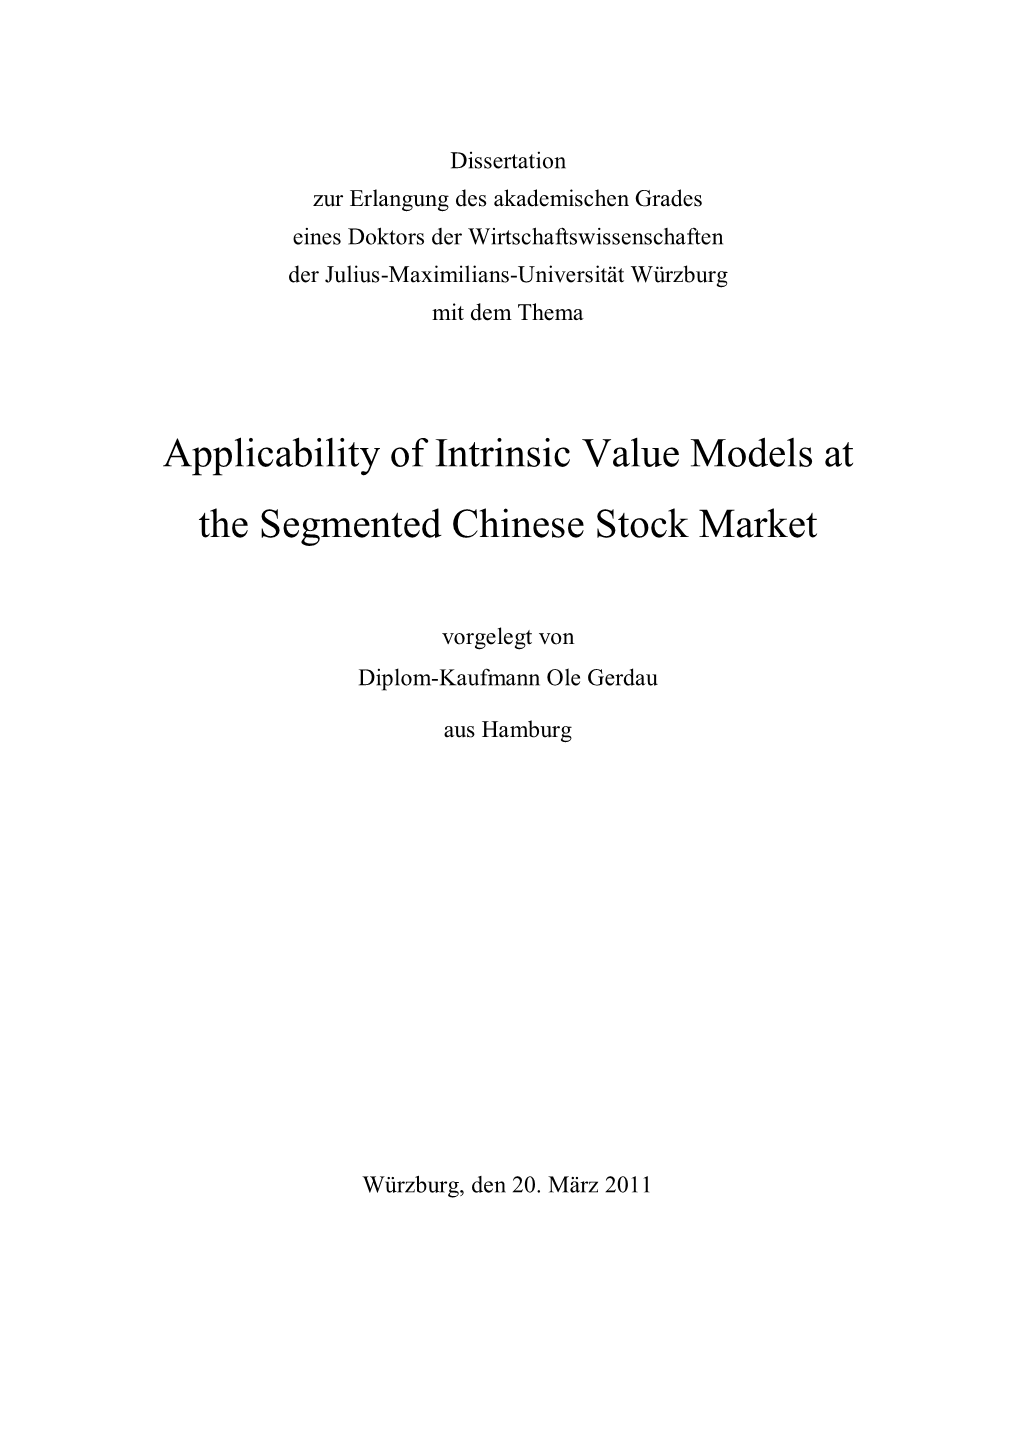 Applicability of Intrinsic Value Models at the Segmented Chinese Stock